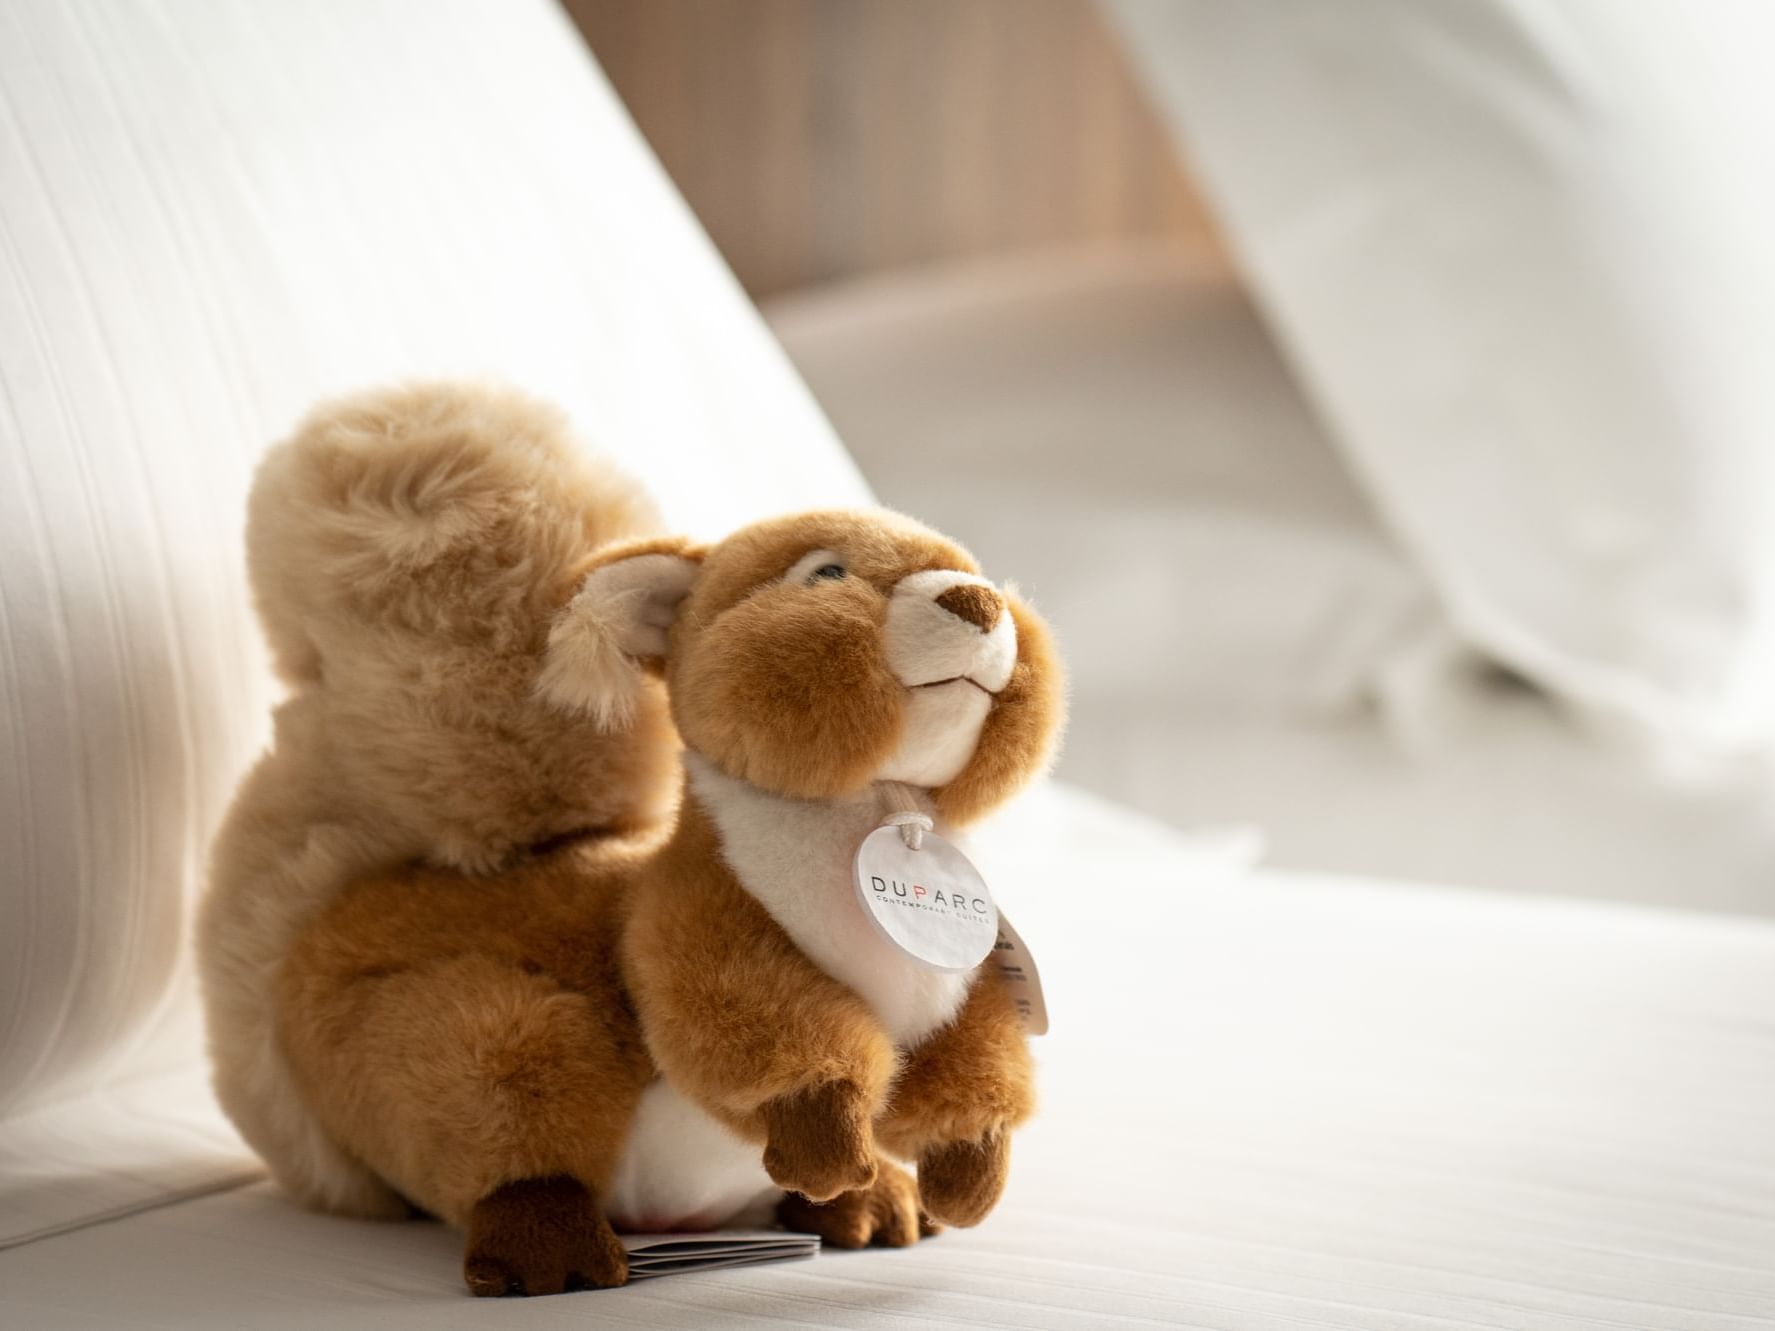 Dupy the squirrel by Trudi, the mascot of the hotel